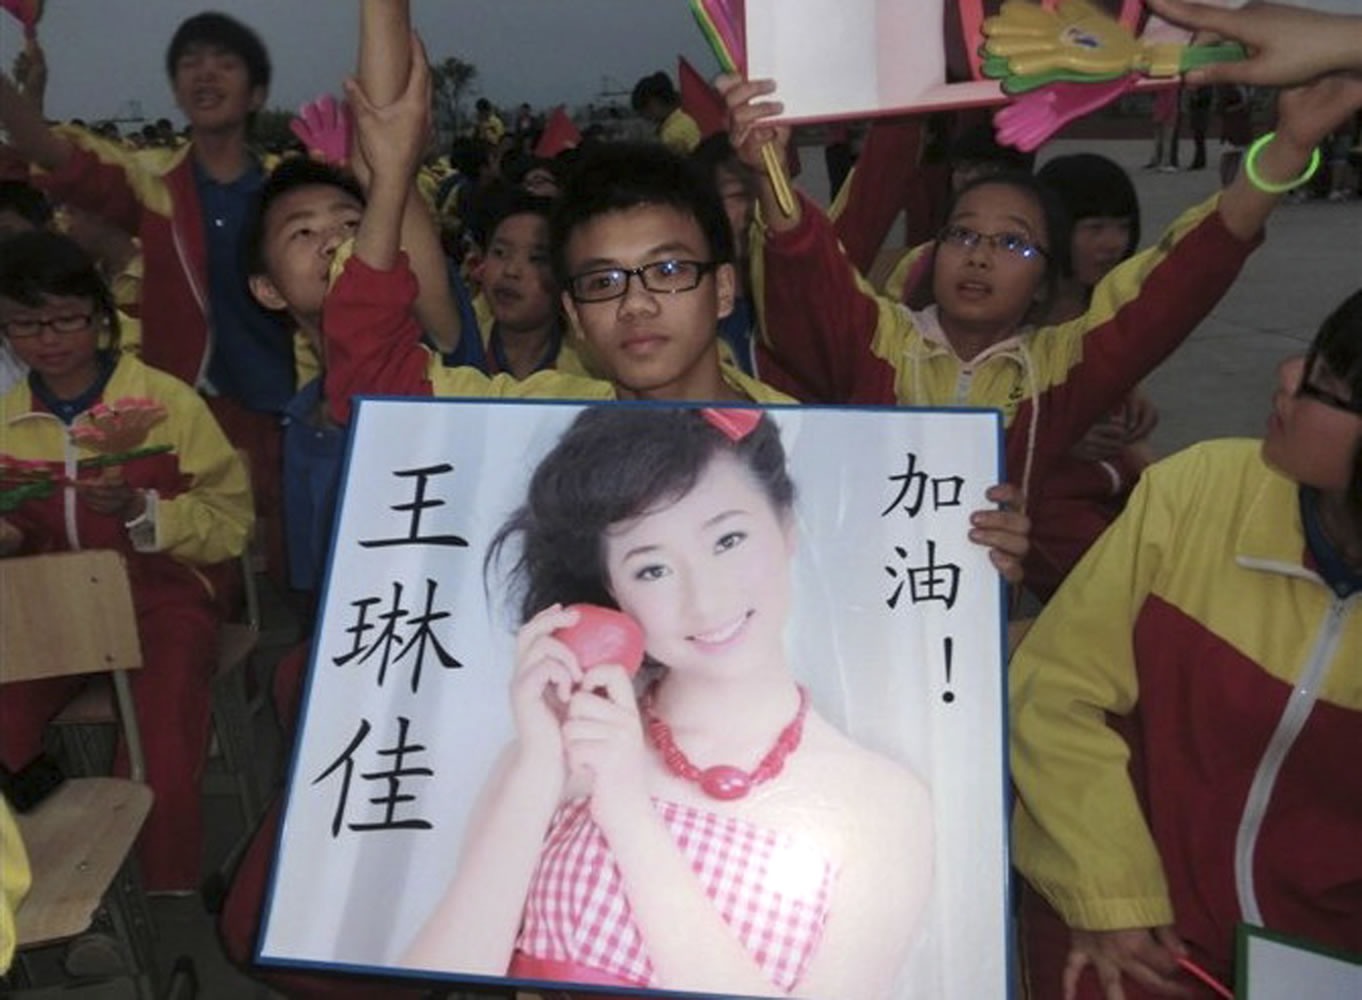 In this undated photo made available Monday, July 8, 2013, a supporter of Wang Linjia, holds up a photo of her with her name during a talent show at a school in Jiangshan city in eastern China's Zhejiang province. Chinese state media and Asiana Airlines have identified the two victims of the Asiana Airlines crash at San Francisco International Airport girls as Ye Mengyuan and Wang Linjia, students in Zhejiang, an affluent coastal province in eastern China.